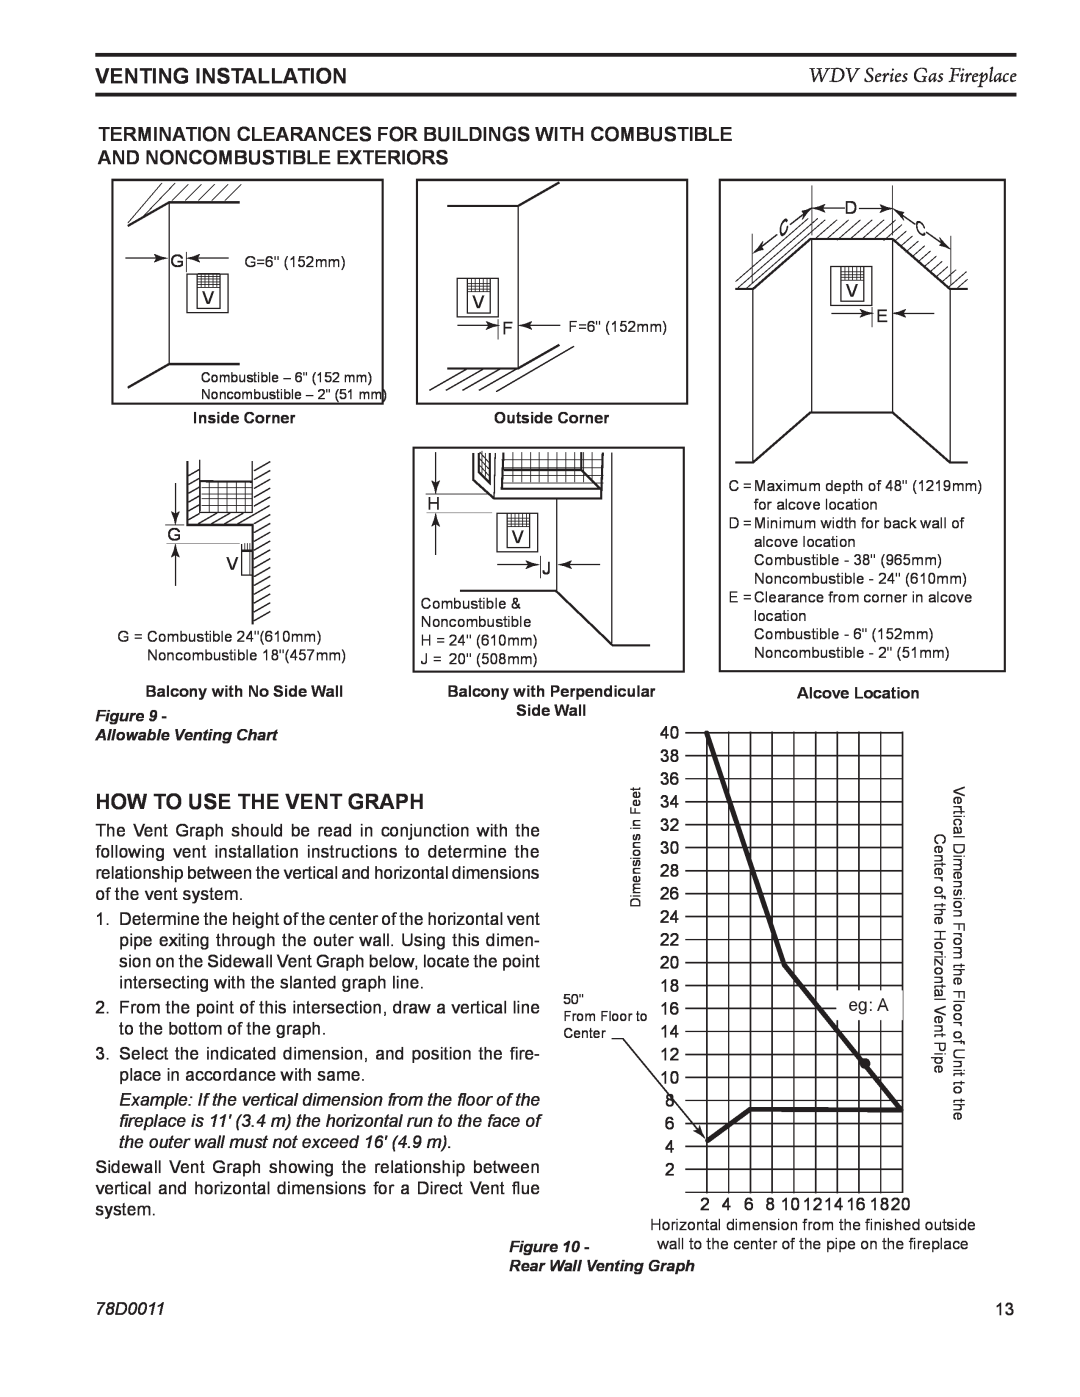 Monessen Hearth WDV500 manual venting installation, How To Use The Vent Graph, WDV Series Gas Fireplace, 78D0011 